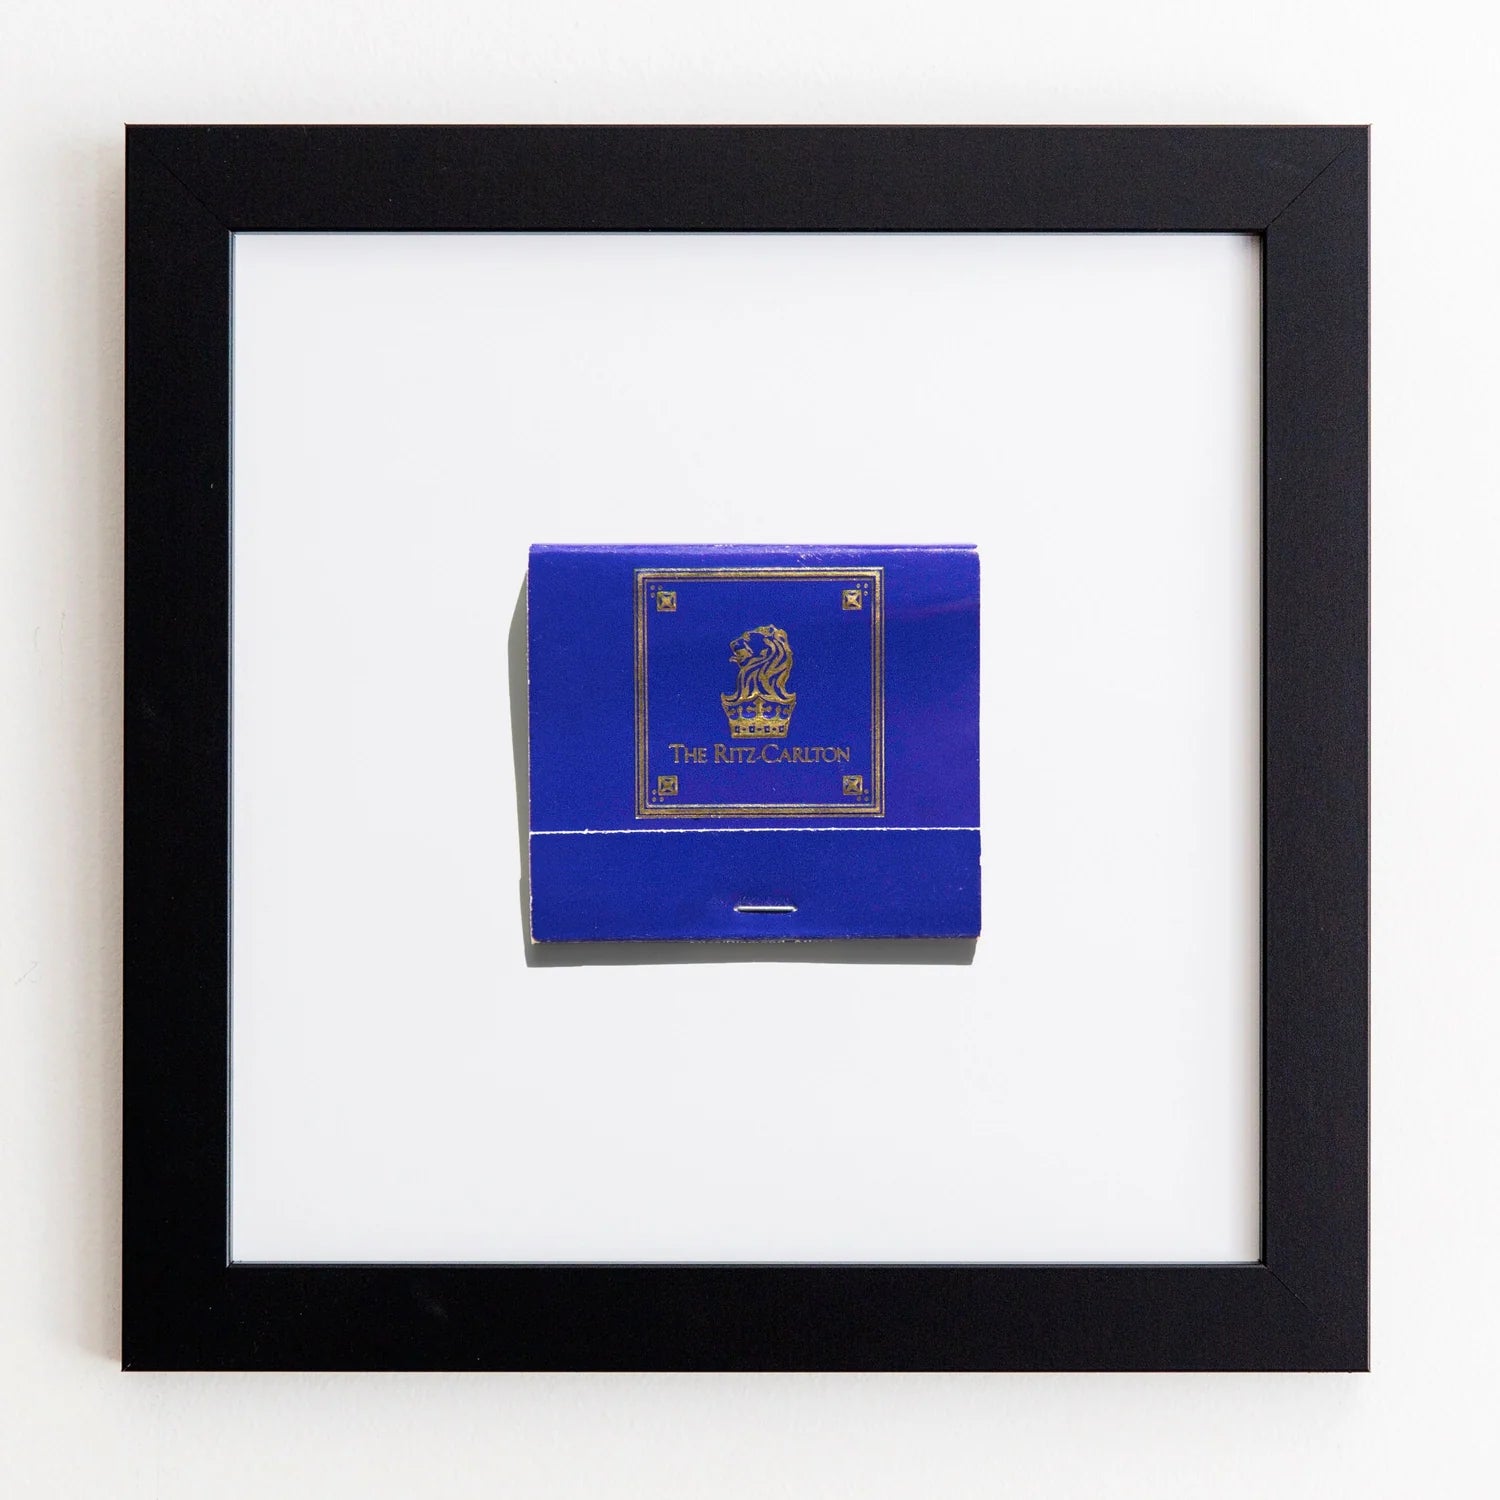 A framed Match South matchbook with a blue cover, centered within an Art Square black frame against a white background.